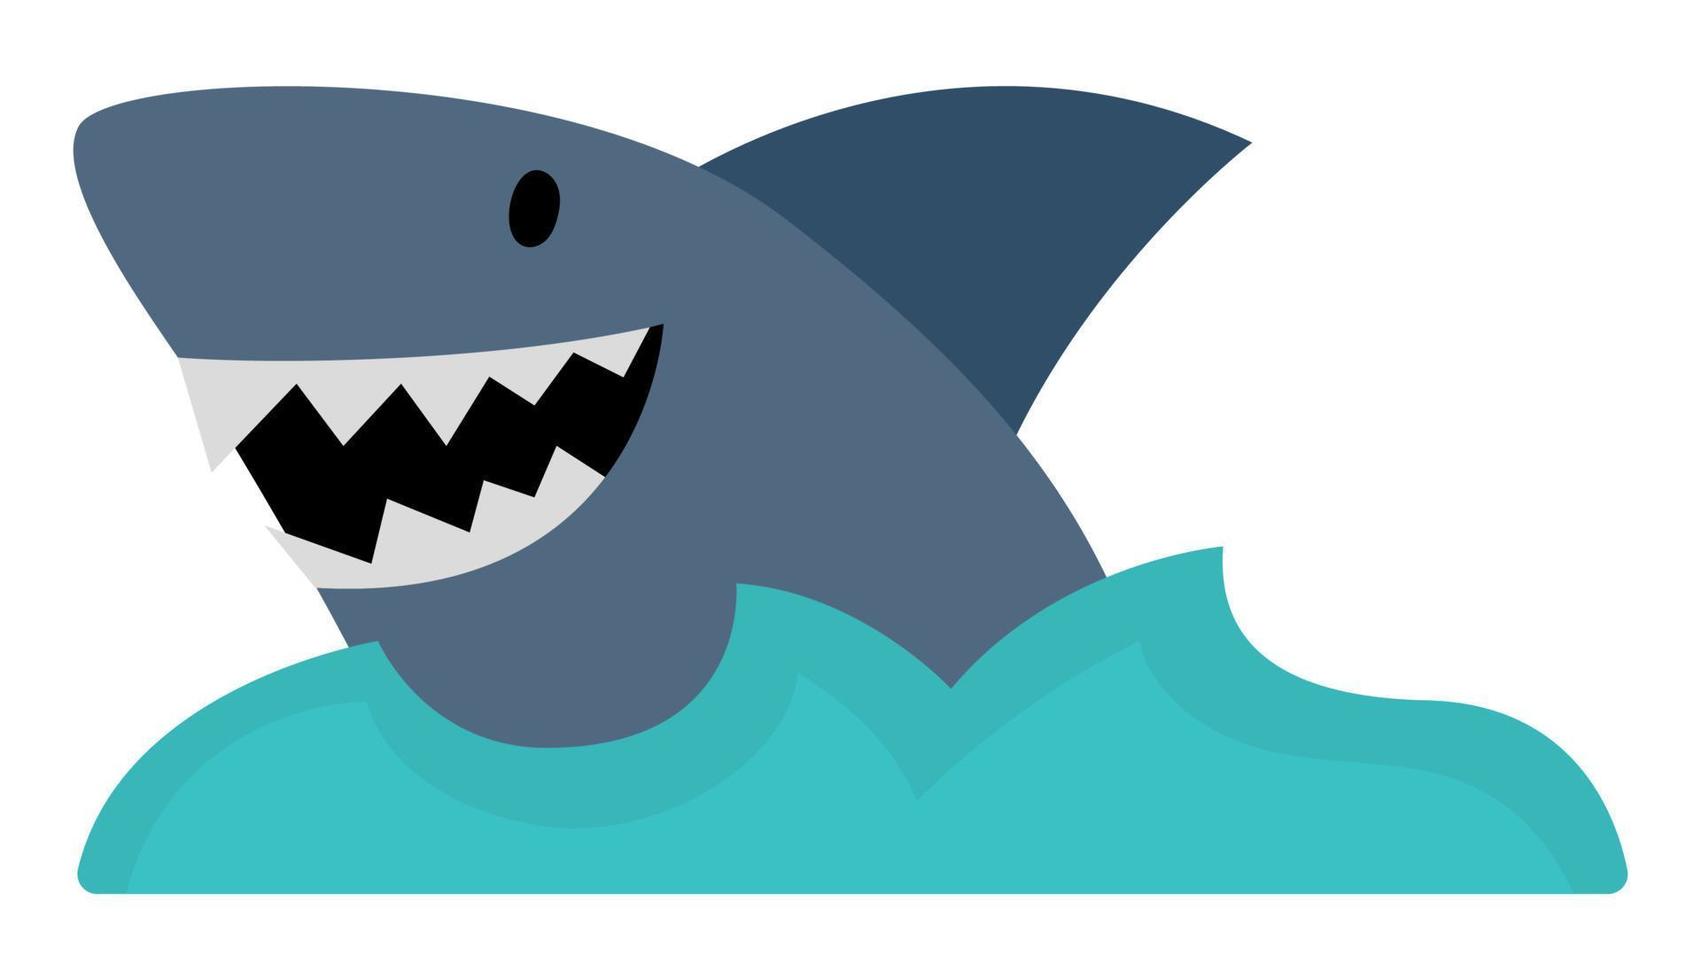 Vector shark and water icon. Cute sea animal illustration. Treasure island hunter picture. Funny pirate party element for kids. Scary fish picture with toothy opened jaws.